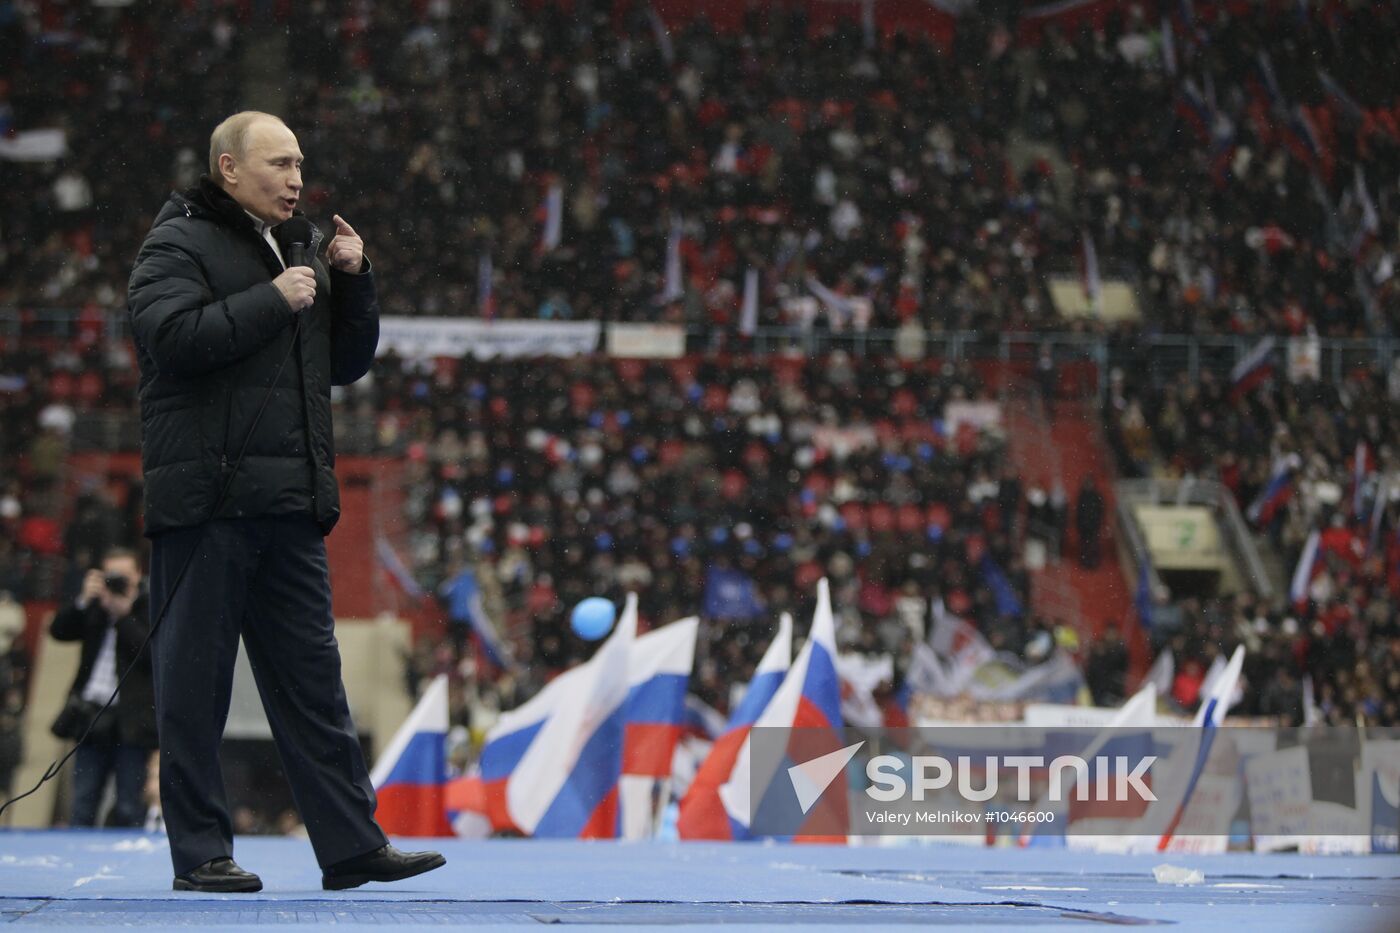 Prime Minister Putin at "Defend the Nation!" rally